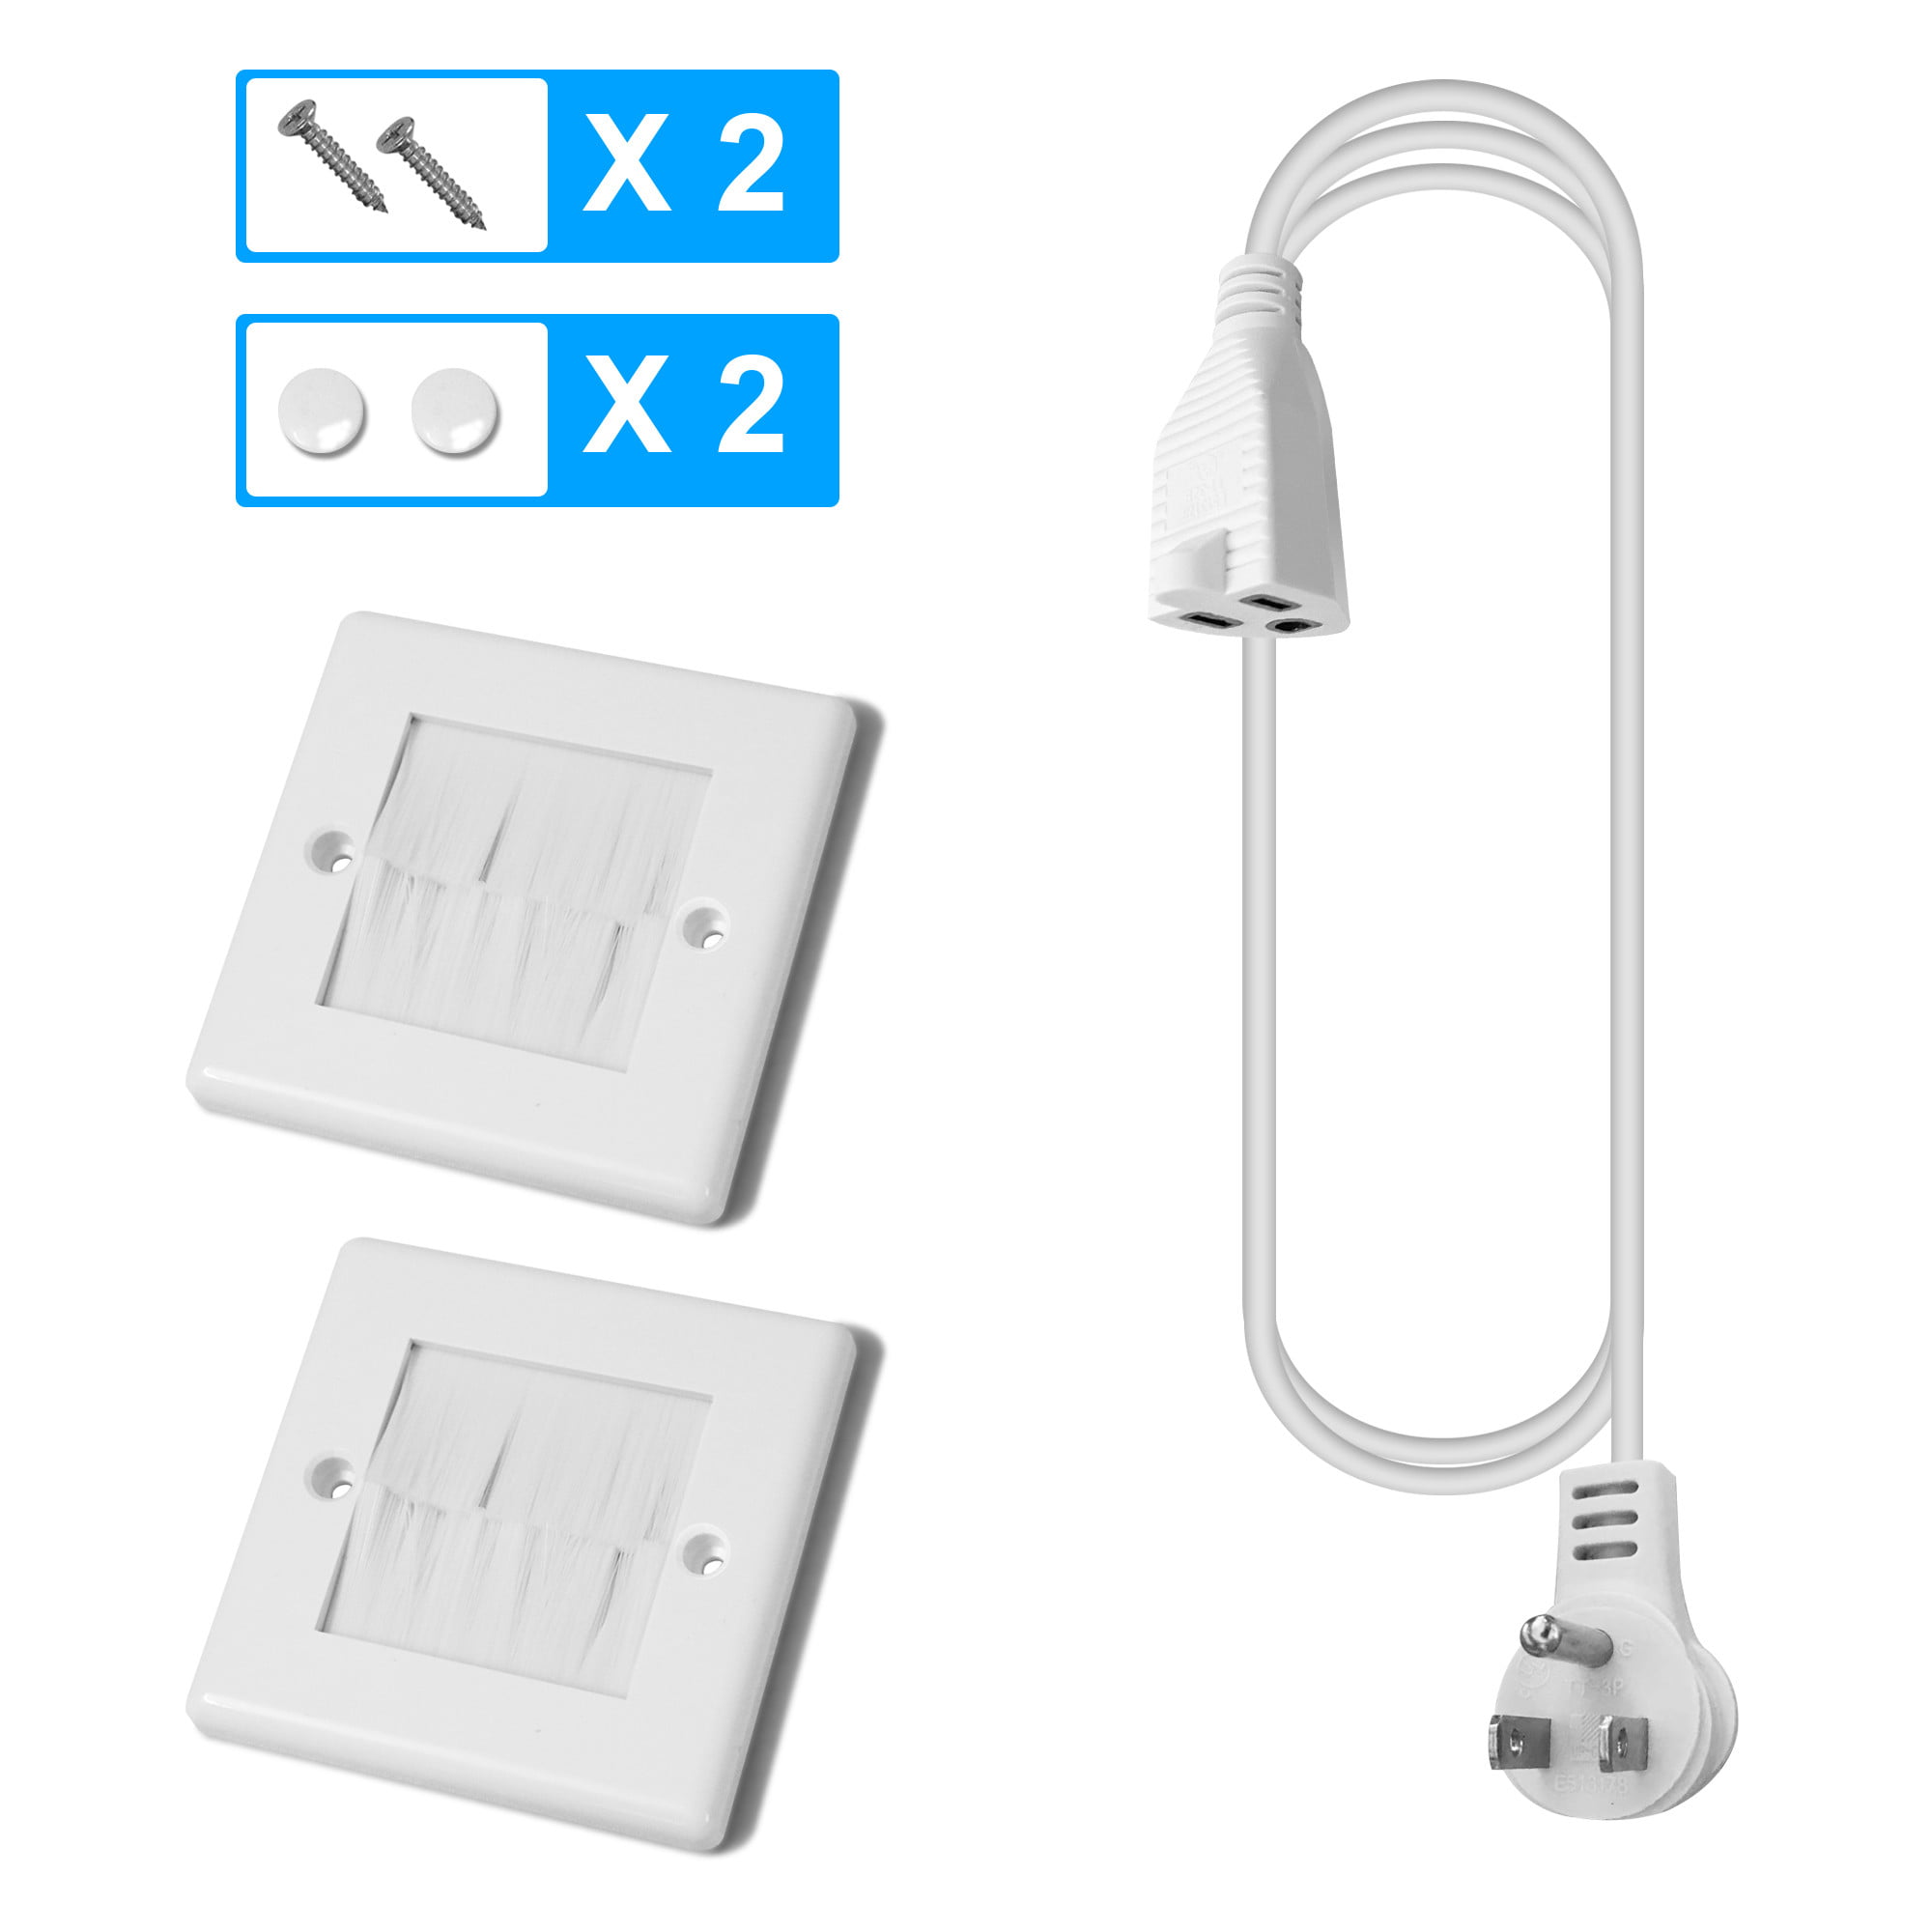 32-inch Cord Cover - On-wall Cable Management Kit For Wall-mounted Tv Or  Computer Cables - Dual Channel Wire Organizer By Simple Cord (white) :  Target